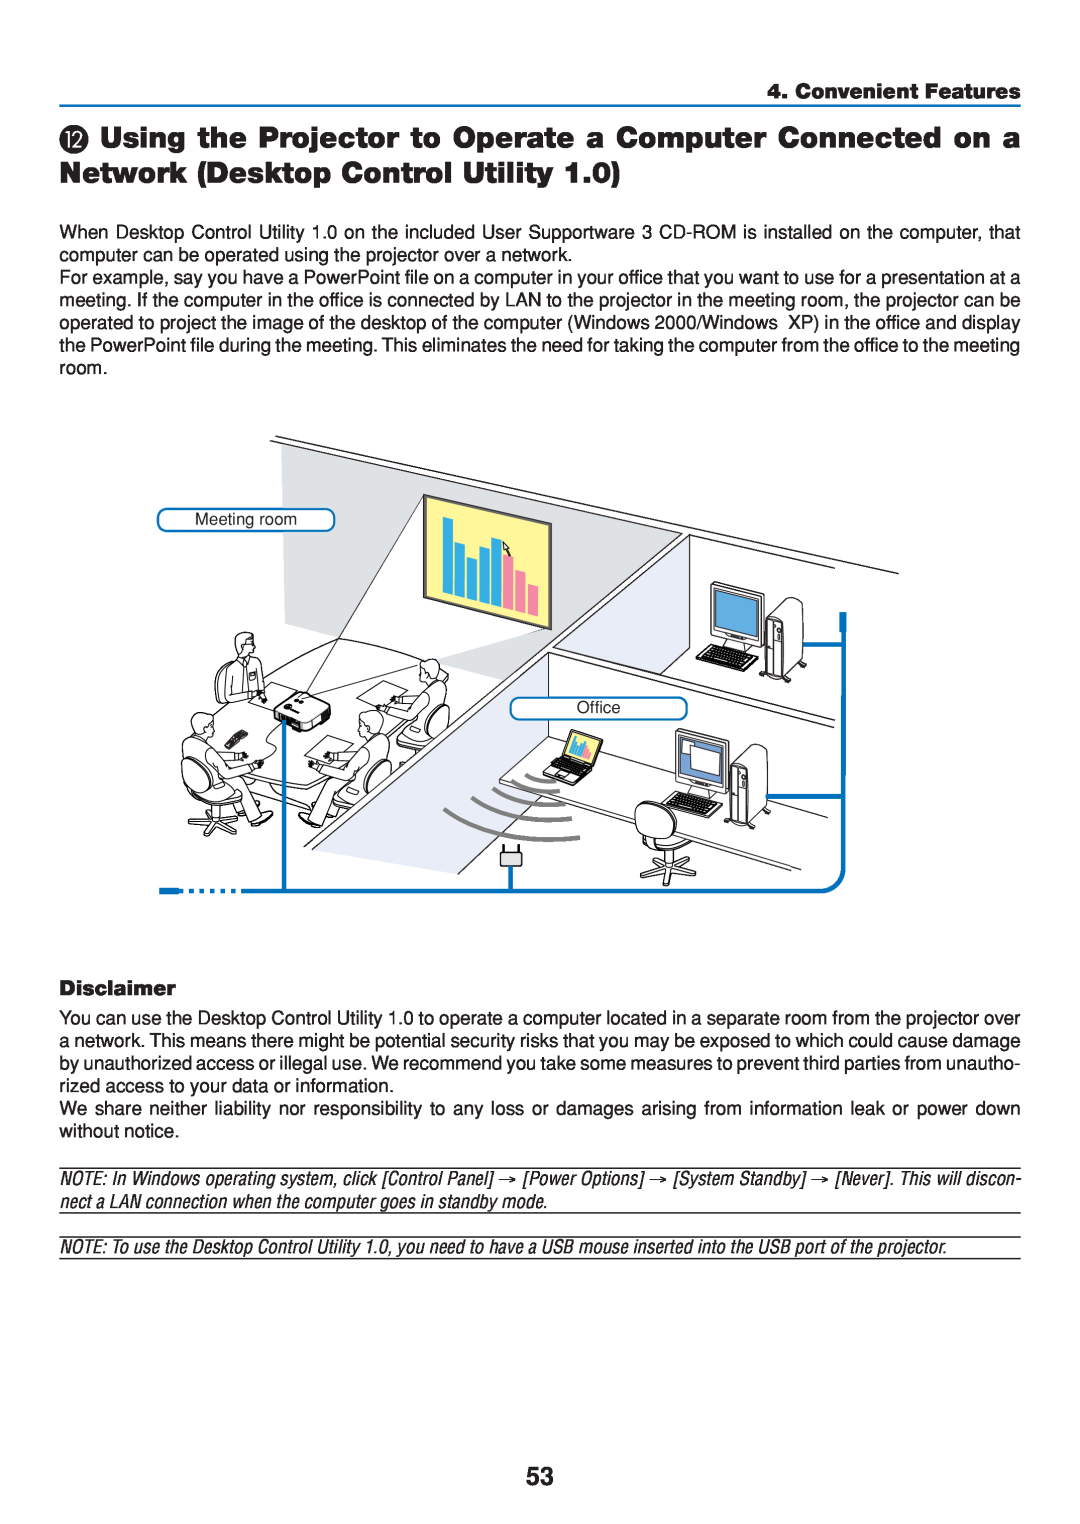 Dukane 8808 user manual Disclaimer, Convenient Features, Meeting room Office 